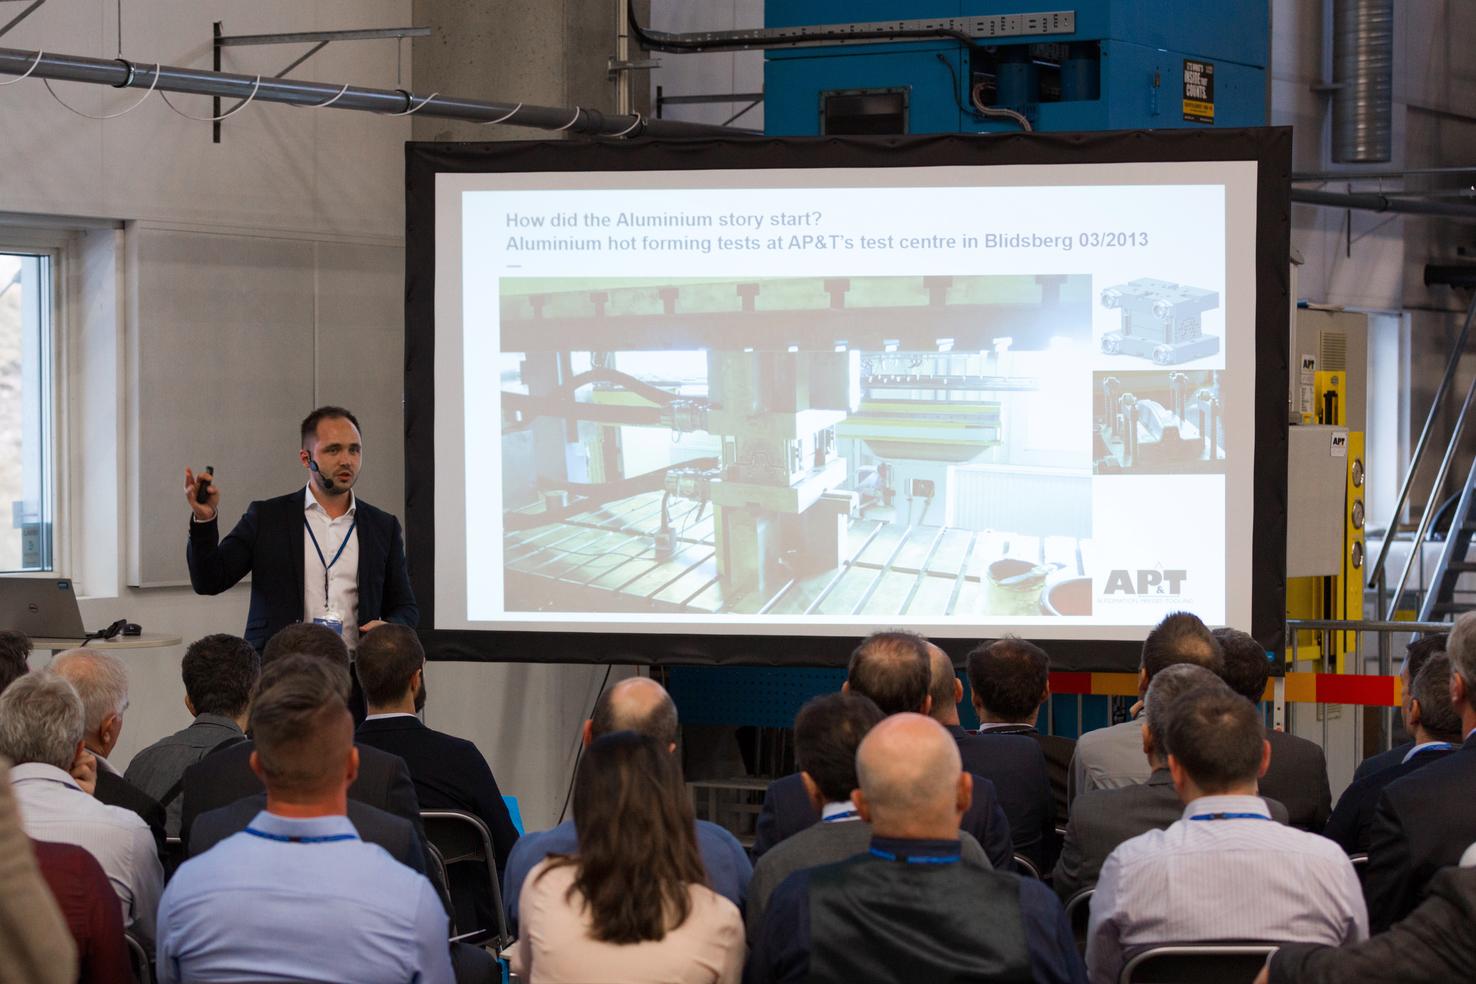 AP&T’s CTO, Technology Development Christian Koroschetz presented the opportunities enabled by AP&T’s process technology for forming high-strength aluminum. 